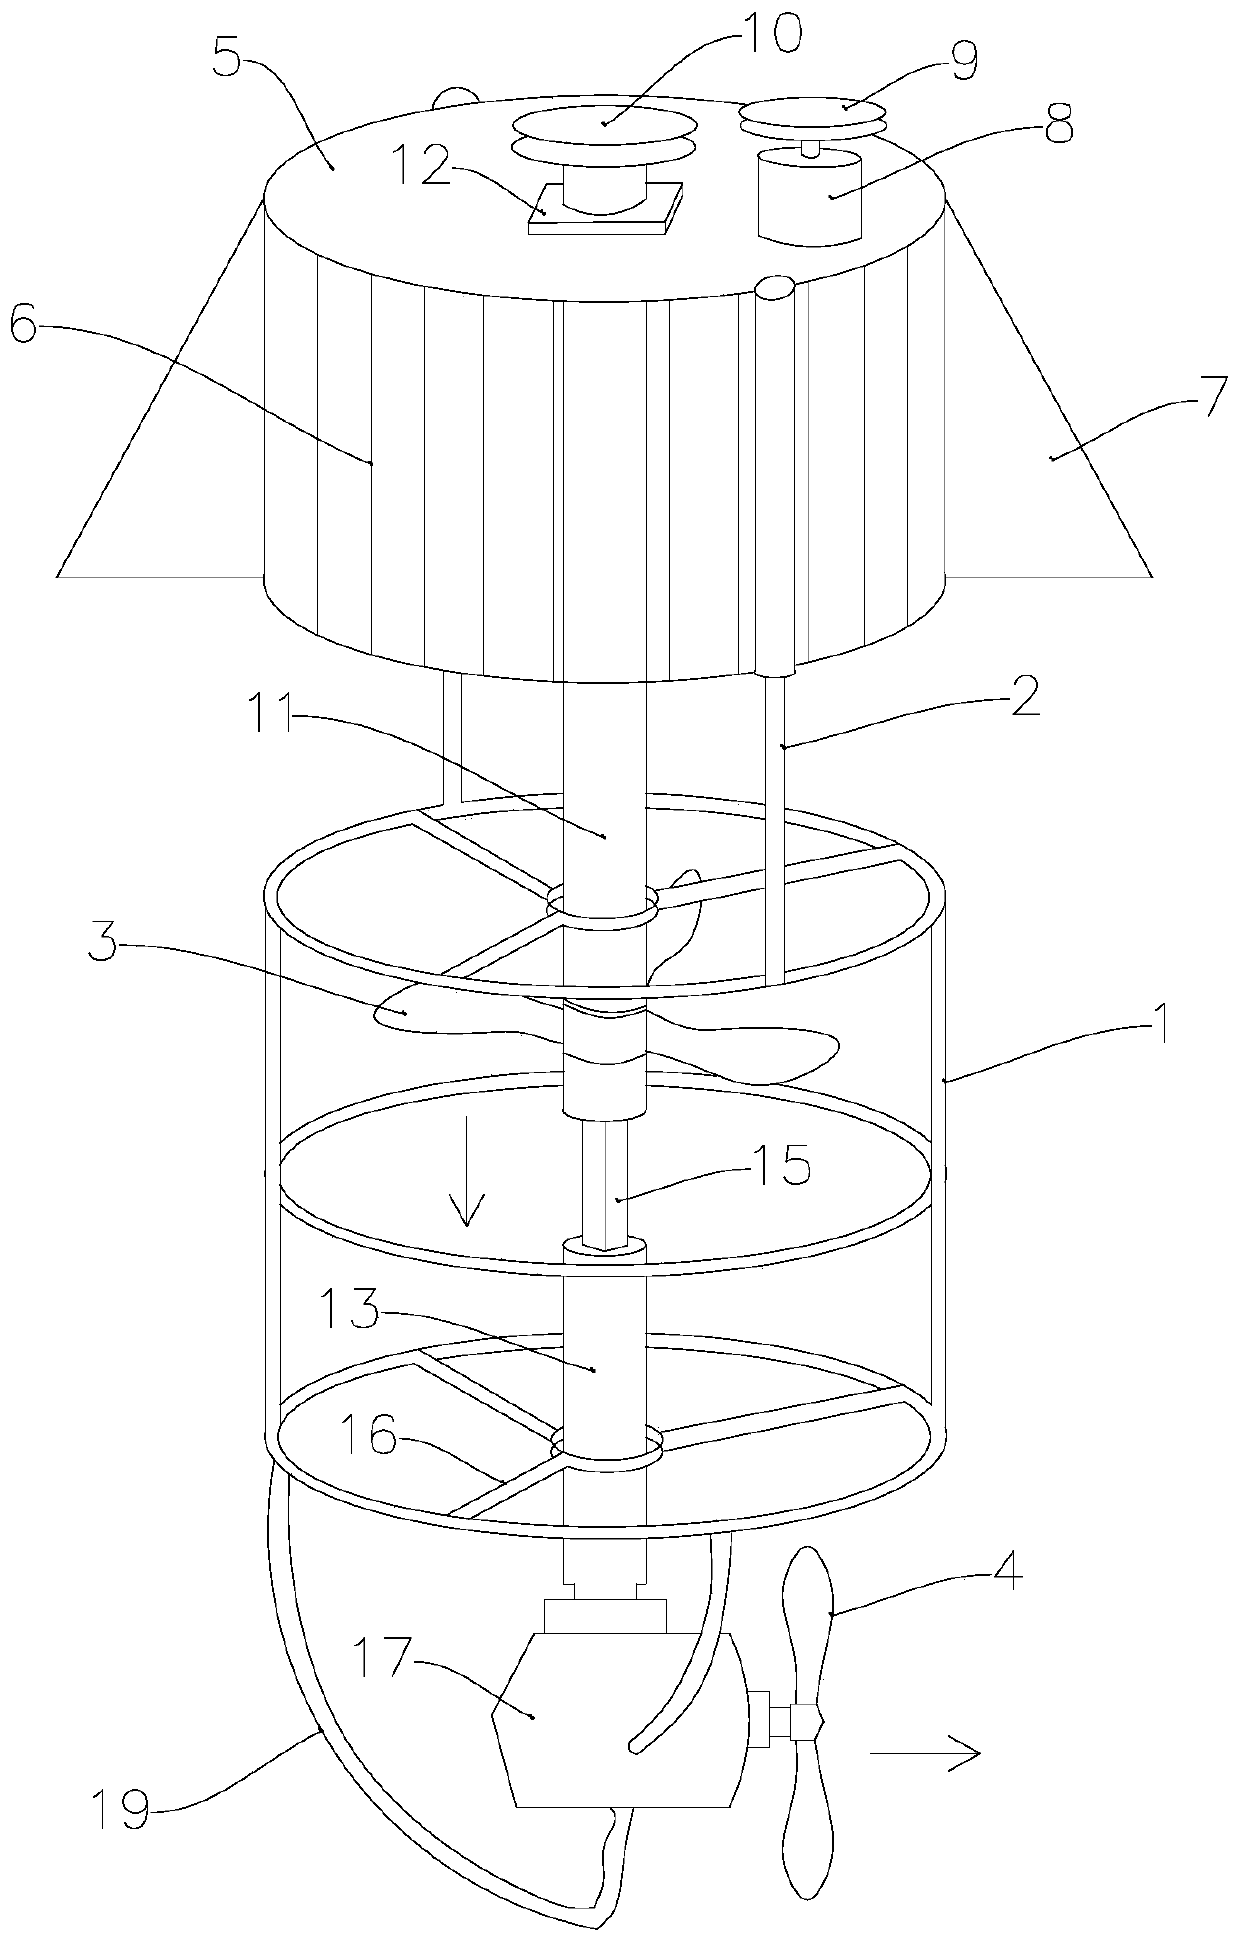 Sewer accelerated drainage device